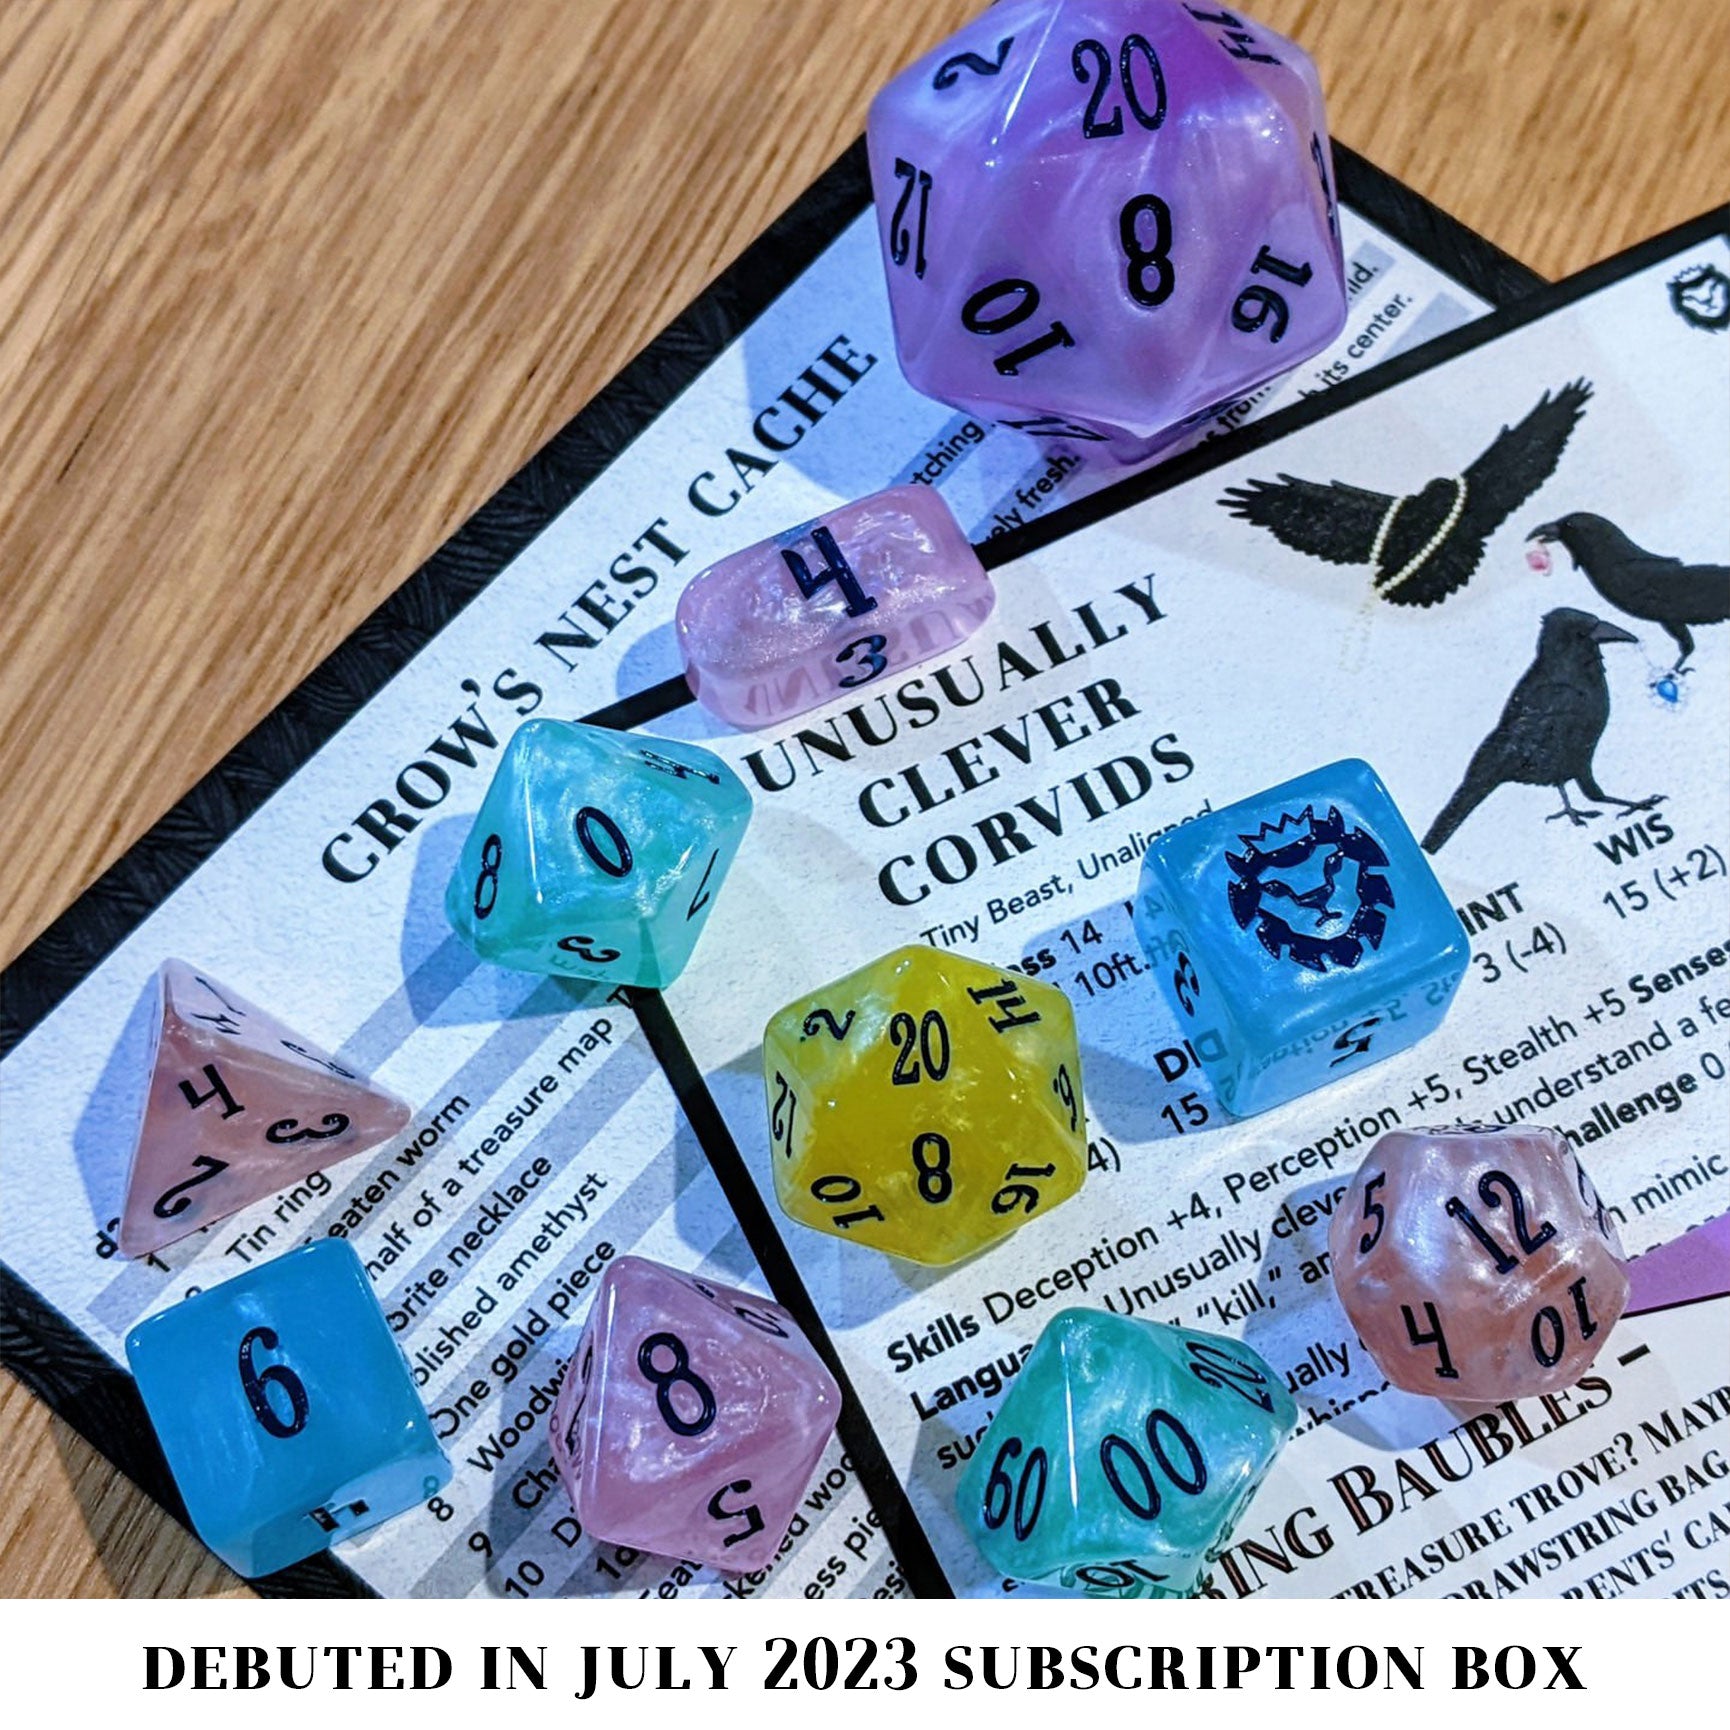 Shimmering Baubles is a 10-piece set of dice in shades of pastel rainbow, inked in dark blue.